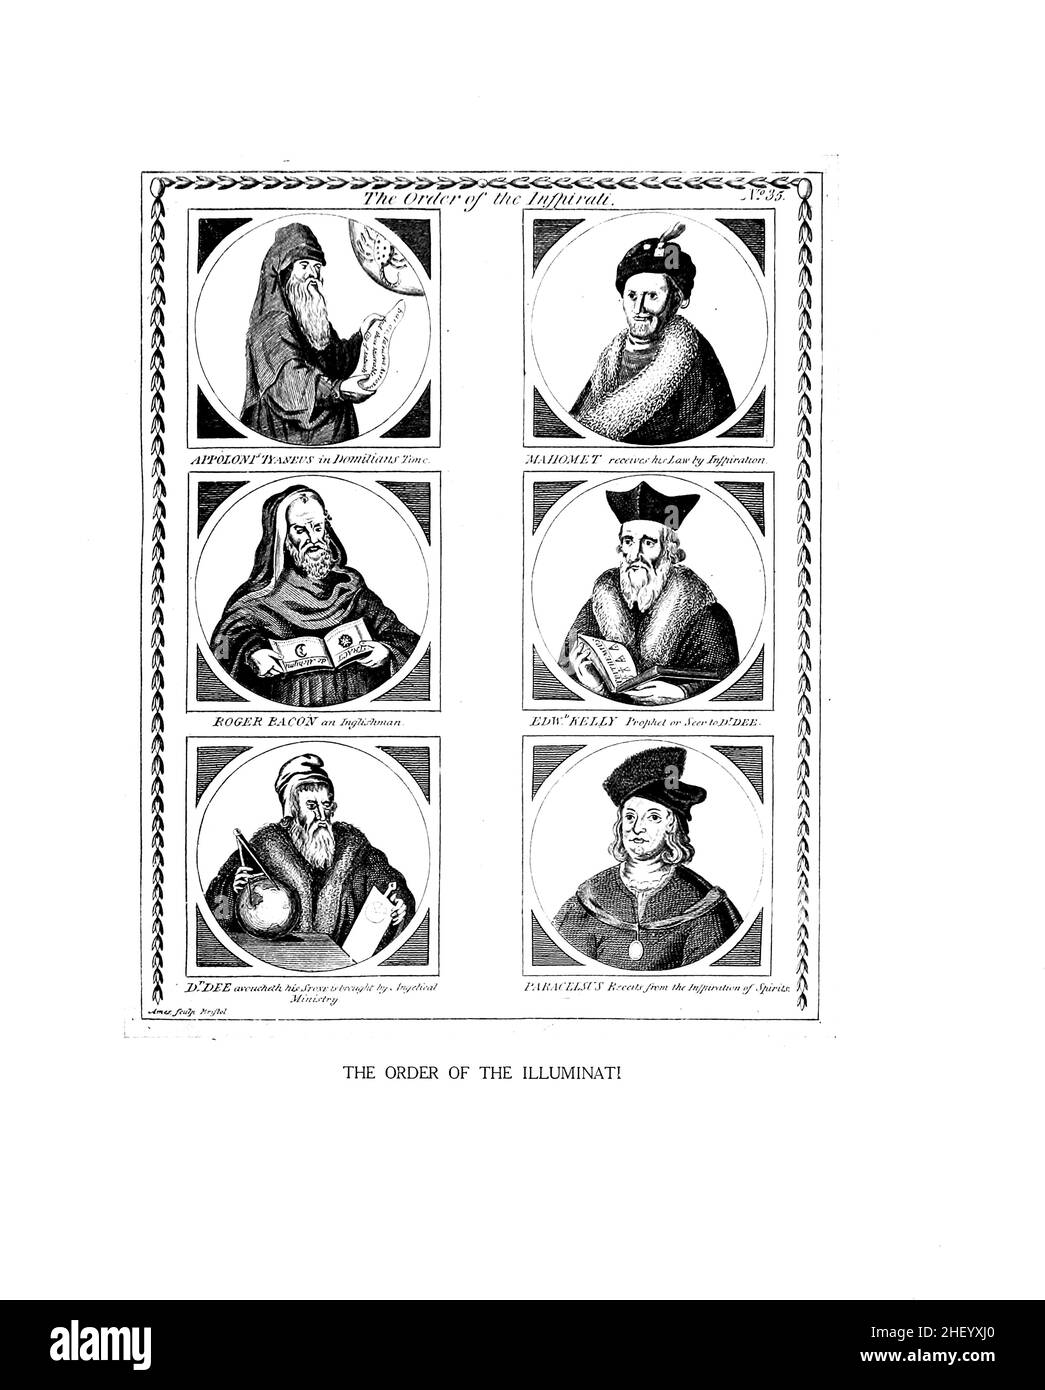 The Order of the Illuminati from An encyclopaedia of occultism : a compendium of information on the occult sciences, occult personalities, psychic science, magic, demonology, spiritism and mysticism by Lewis Spence, Published in London by George Routledge & sons, ltd. in 1920 Stock Photo